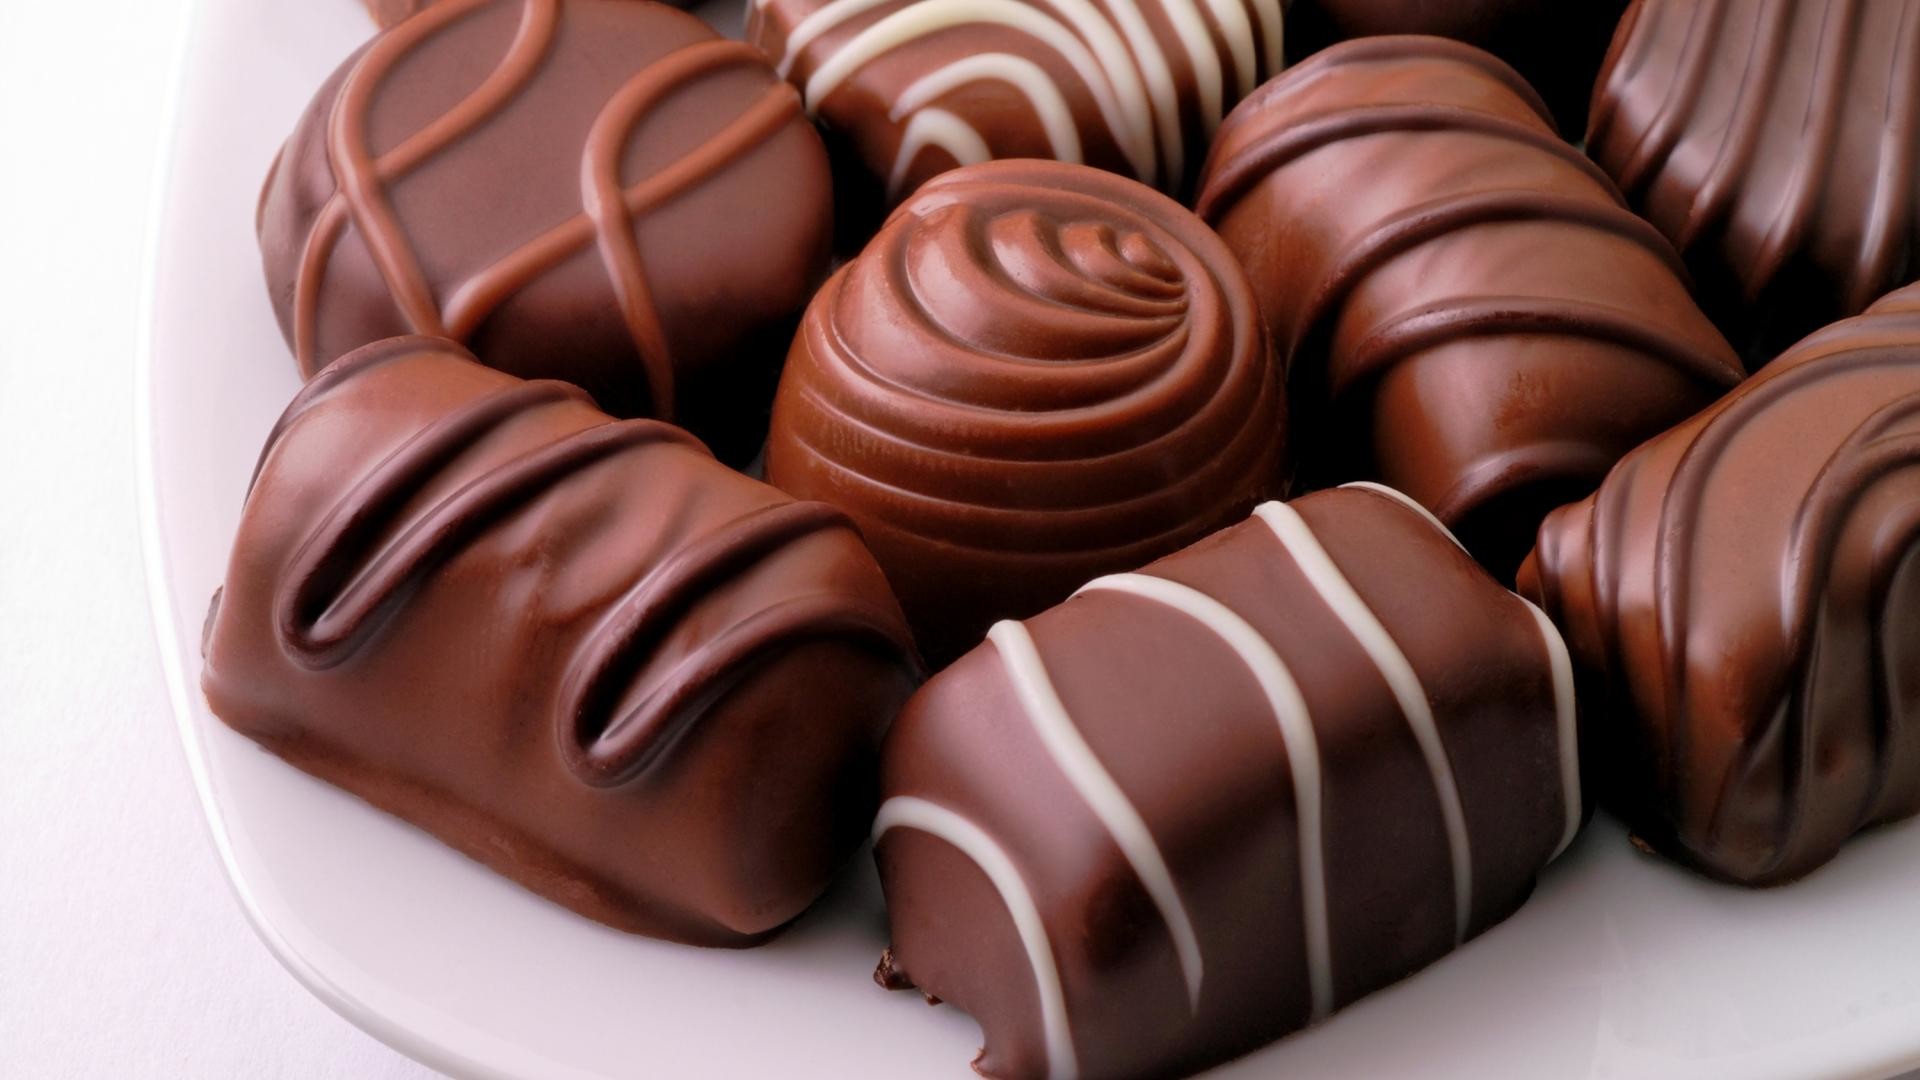 Love Chocolates wallpaper by MARIKA  Download on ZEDGE  e4a8